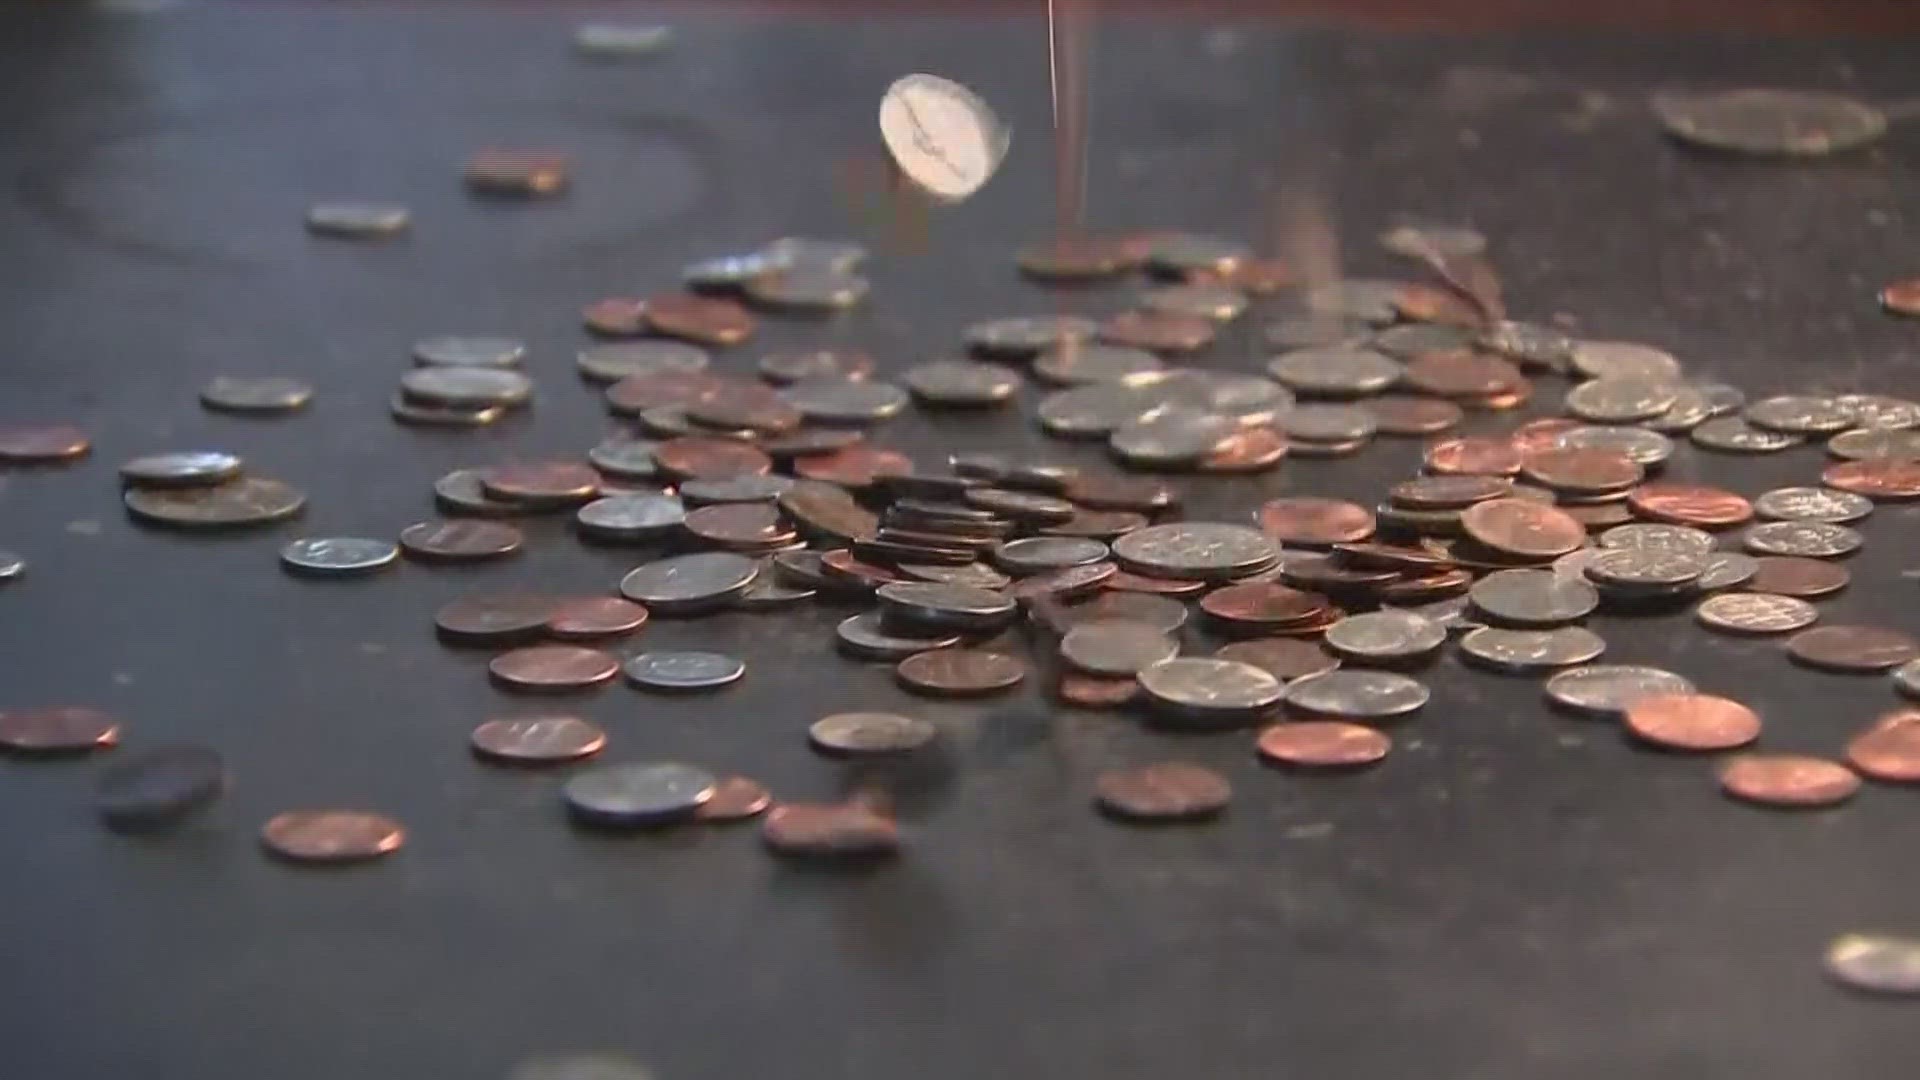 Maine's oldest credit union will stop accepting coins starting Sept. 1. Do other financial institutions in Maine think this will be the start of a trend?